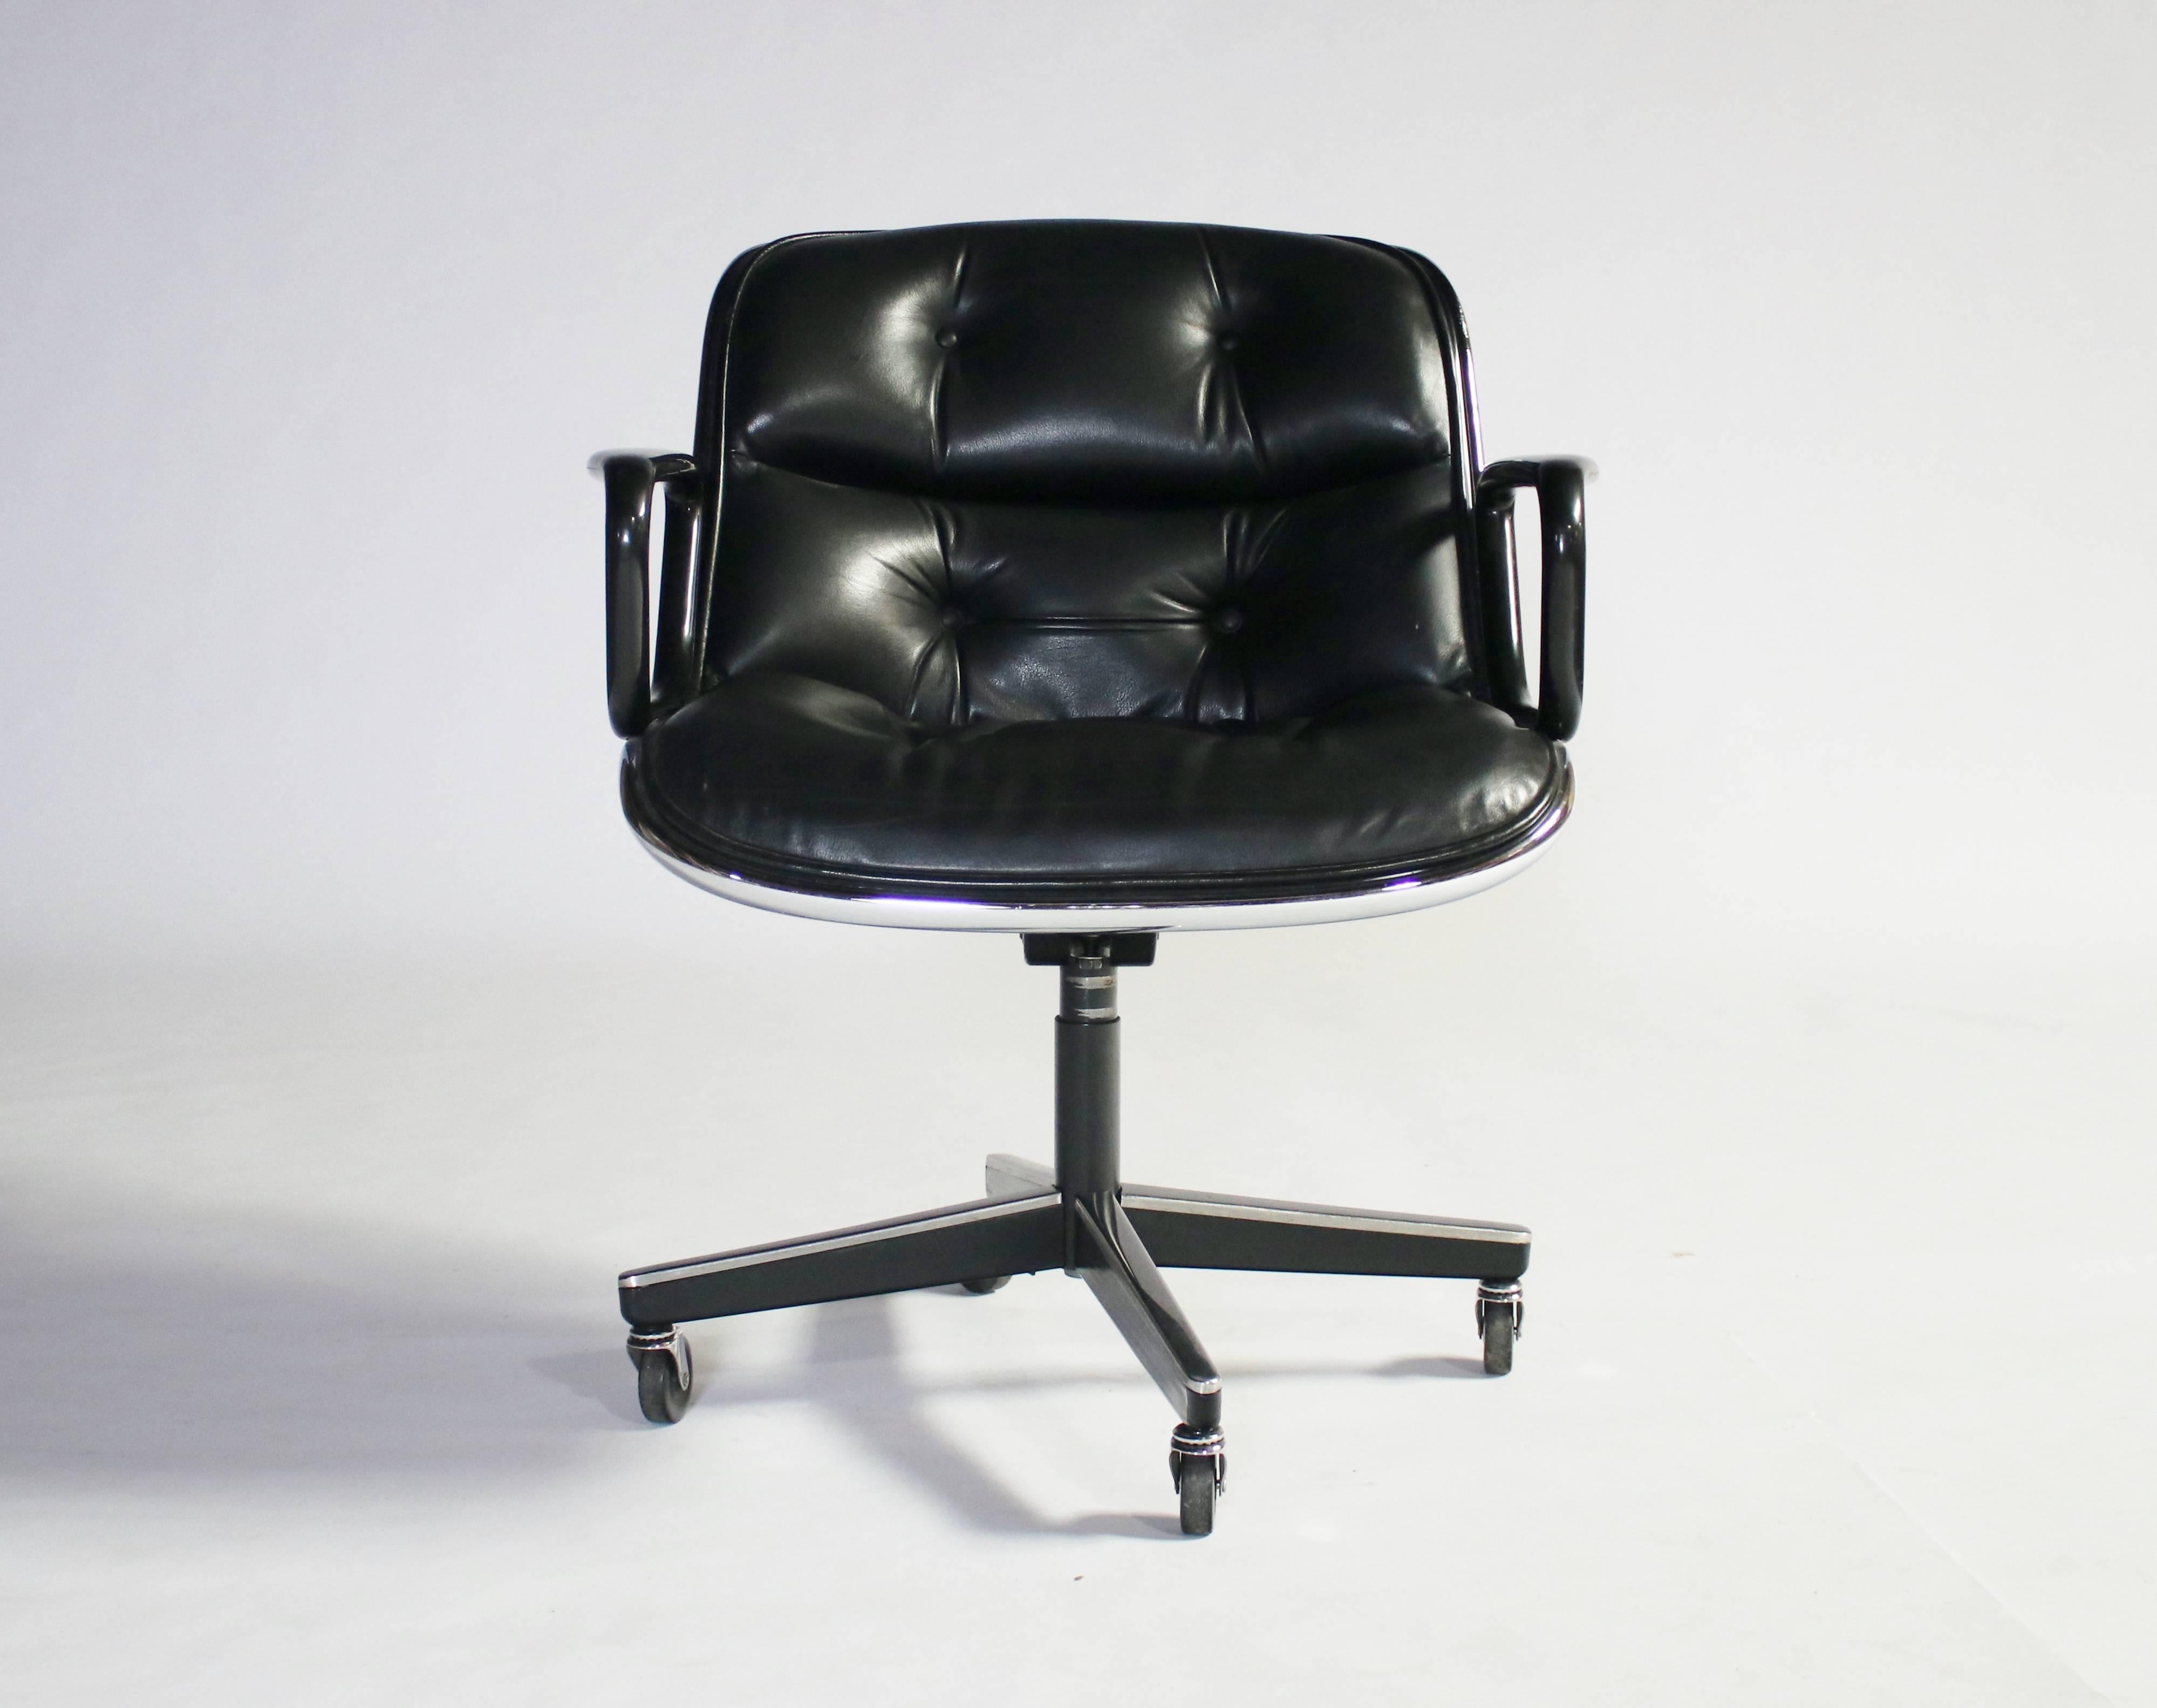 Vintage Executive armchair by Charles Pollock for Knoll on castors in black leather. Provenance and Knoll labels on bottom, dated 1988.